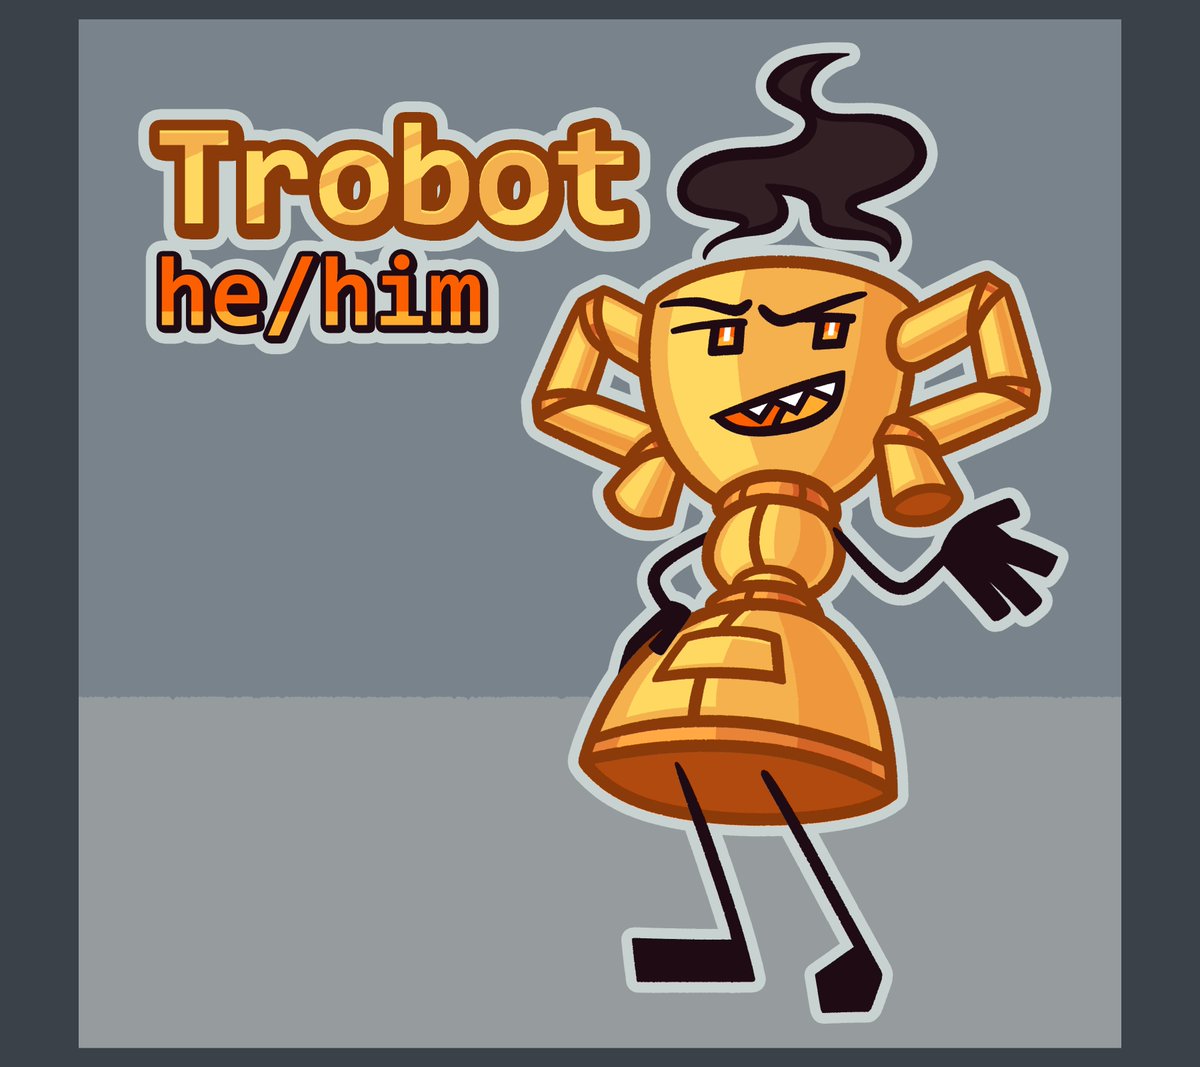 Meet Trobot!

His hobby is yoga, and his favorite food is lightly buttered toast. Though a bit of a hothead who closely guards his feelings, Trobot always tries to act in the best interest of his fellow bots. He despises his creator and everything he does.

#pseudonomicsAU